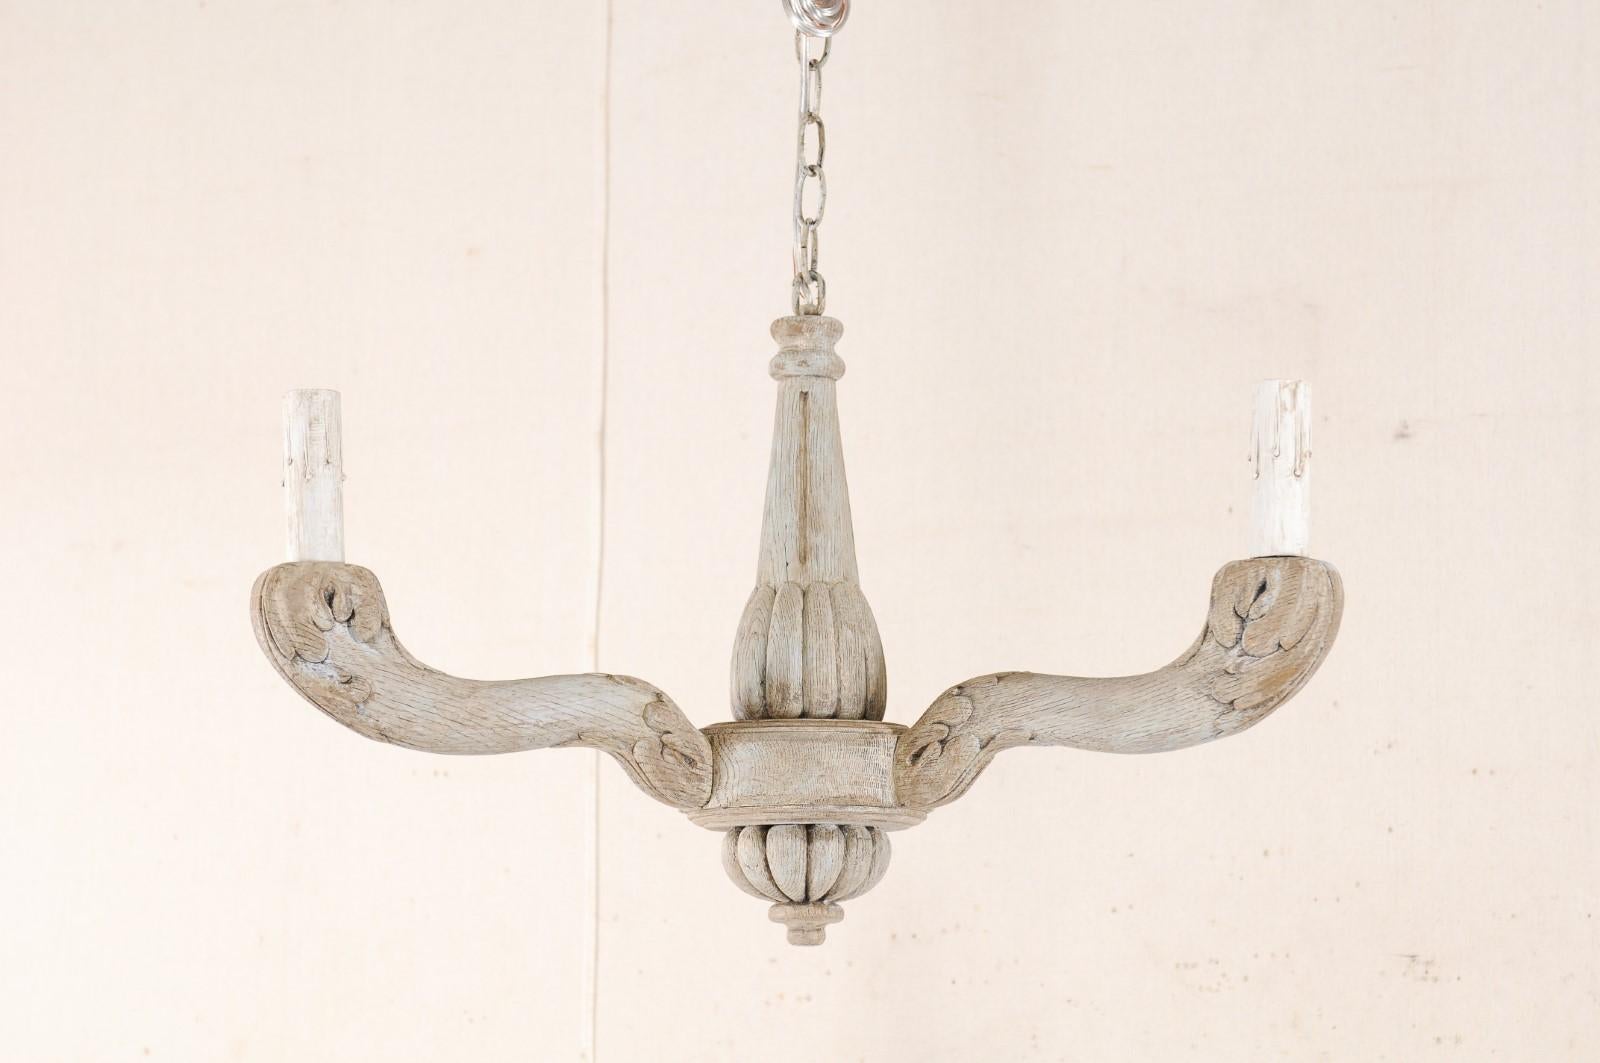 A French carved and painted wood, three-light chandelier from the mid-20th century. This vintage chandelier from France features a carved central column with rounded gallery which supports three arms carved with leaves. Each arm terminates into a